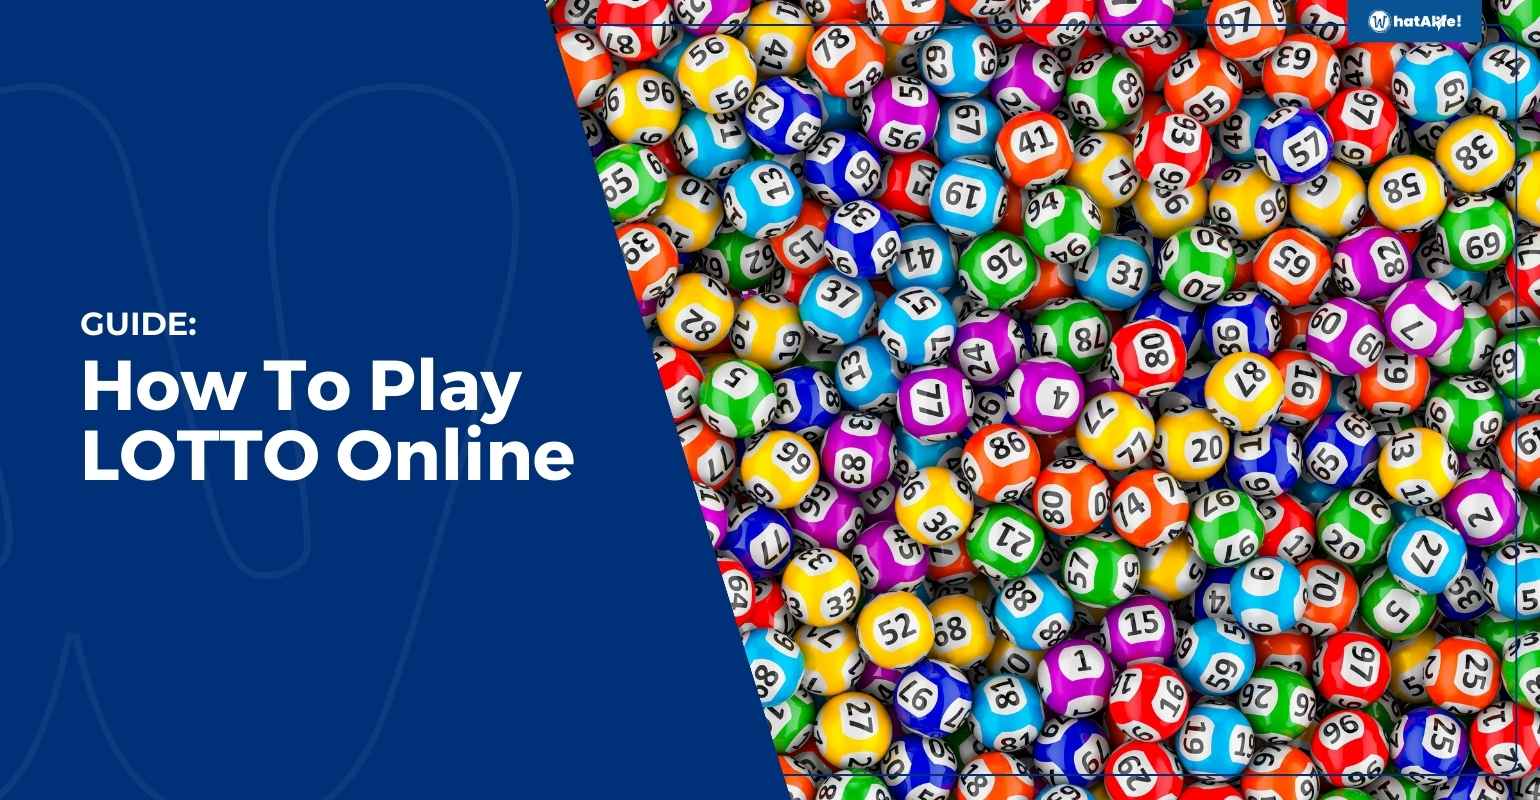 GUIDE: How To Play Lotto Online 